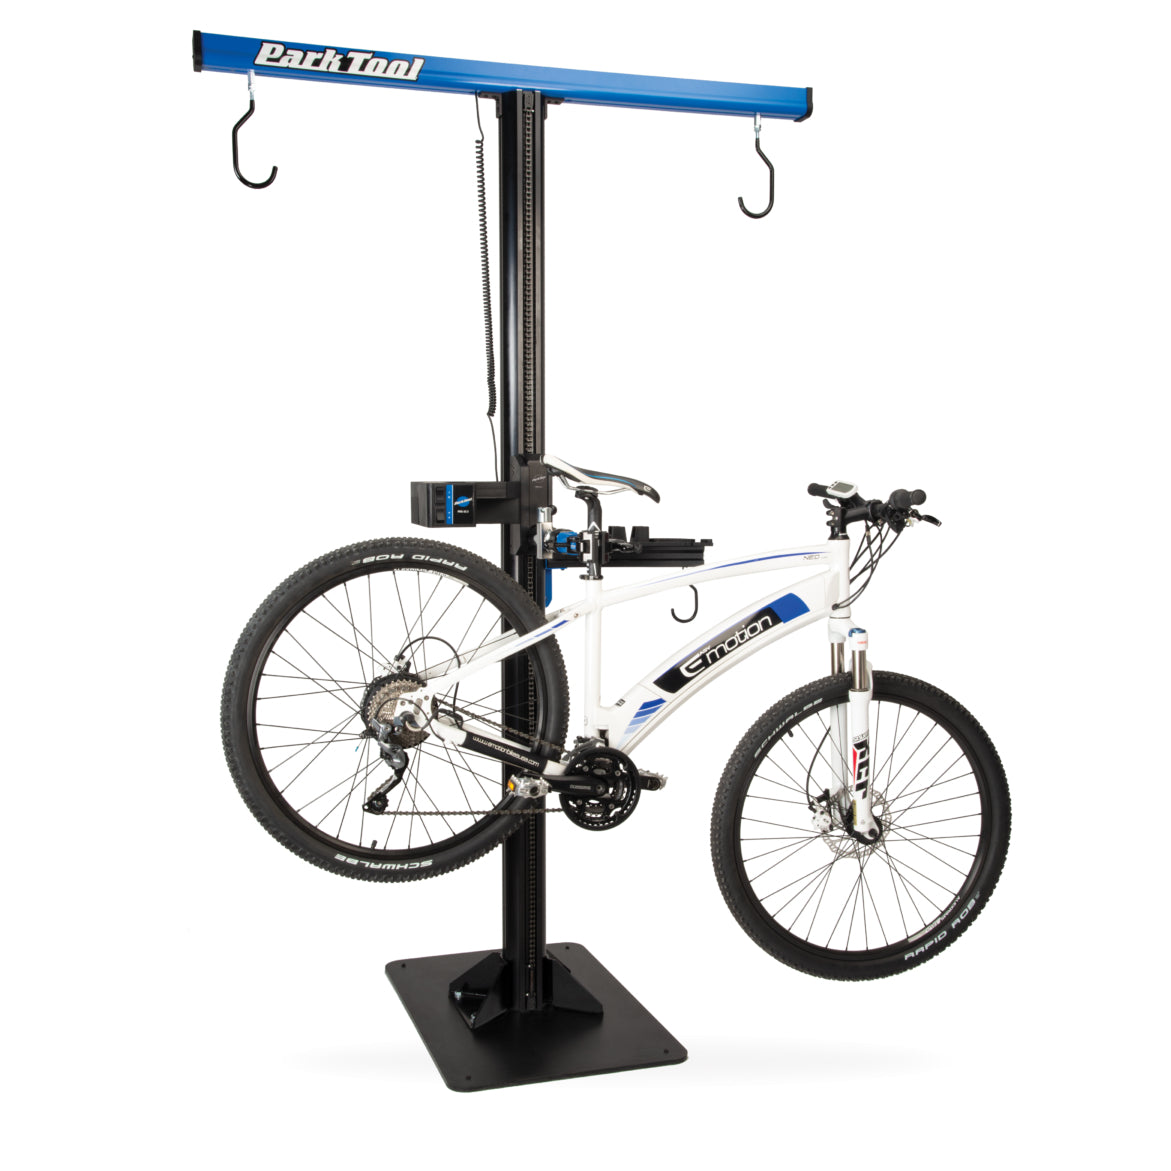 Park Tool PRS-33.2 Power Lift Shop Stand - The Bikesmiths